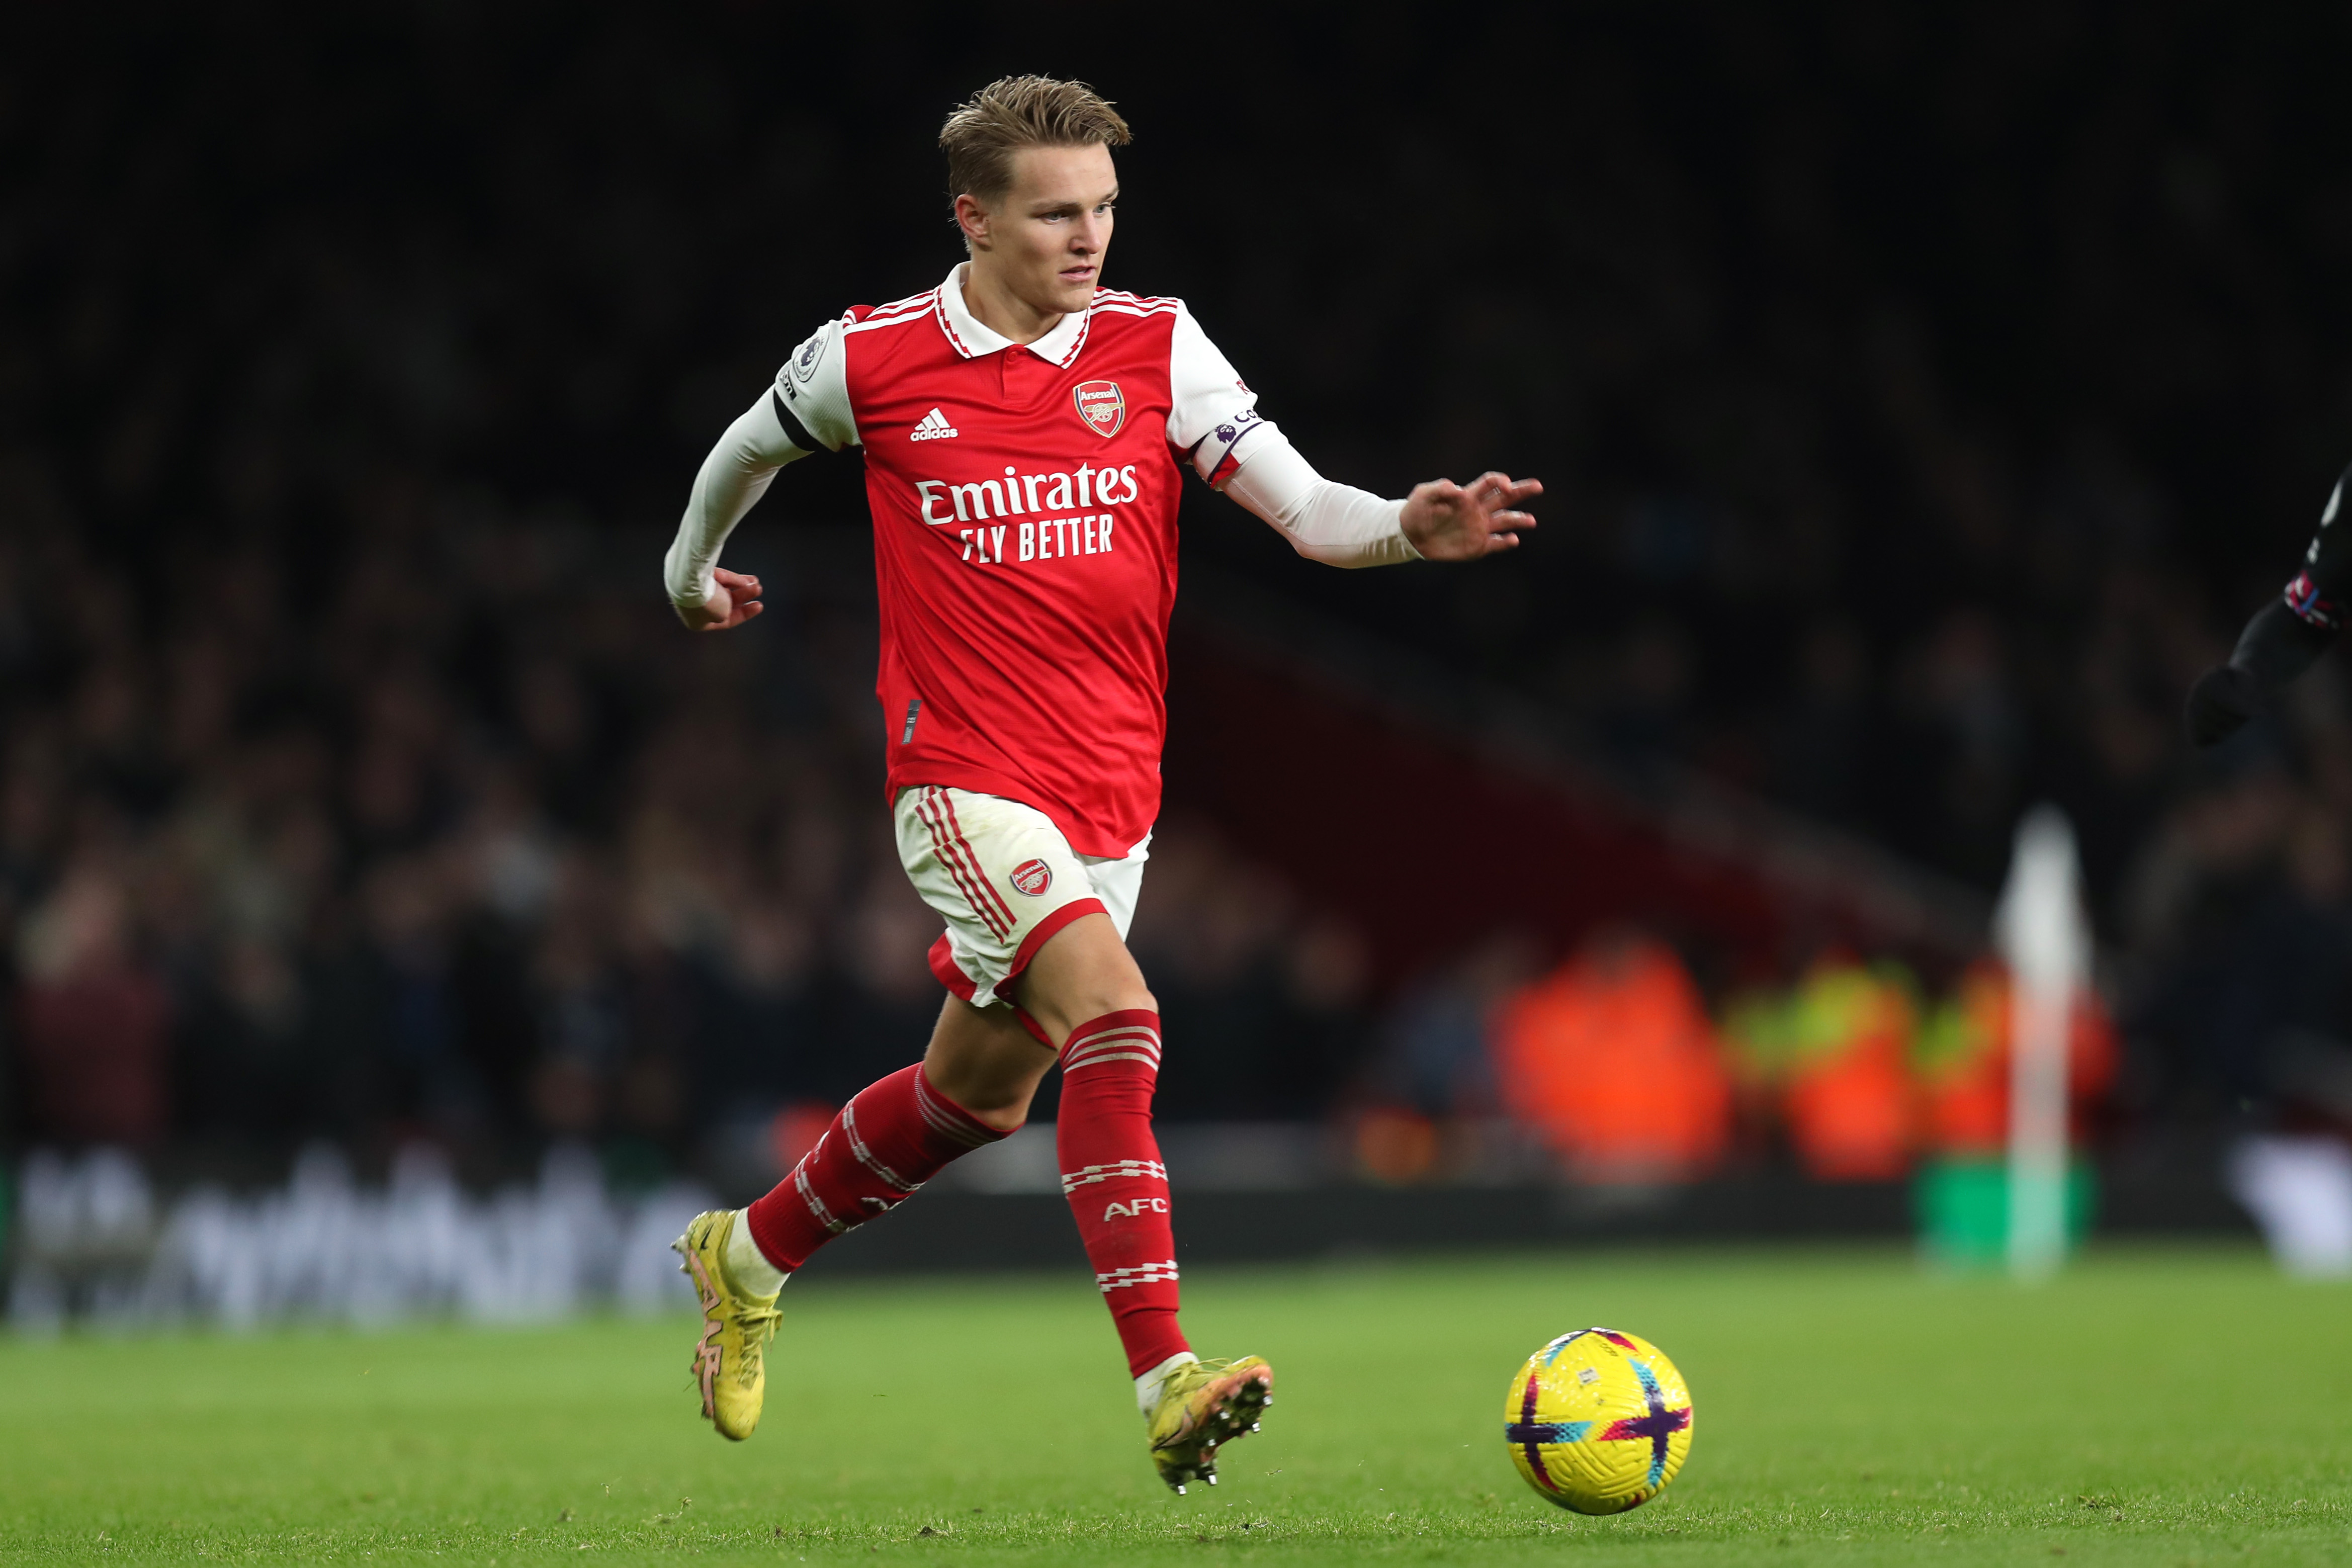 Arsenal captain Martin Odegaard crowned Premier League player of the month